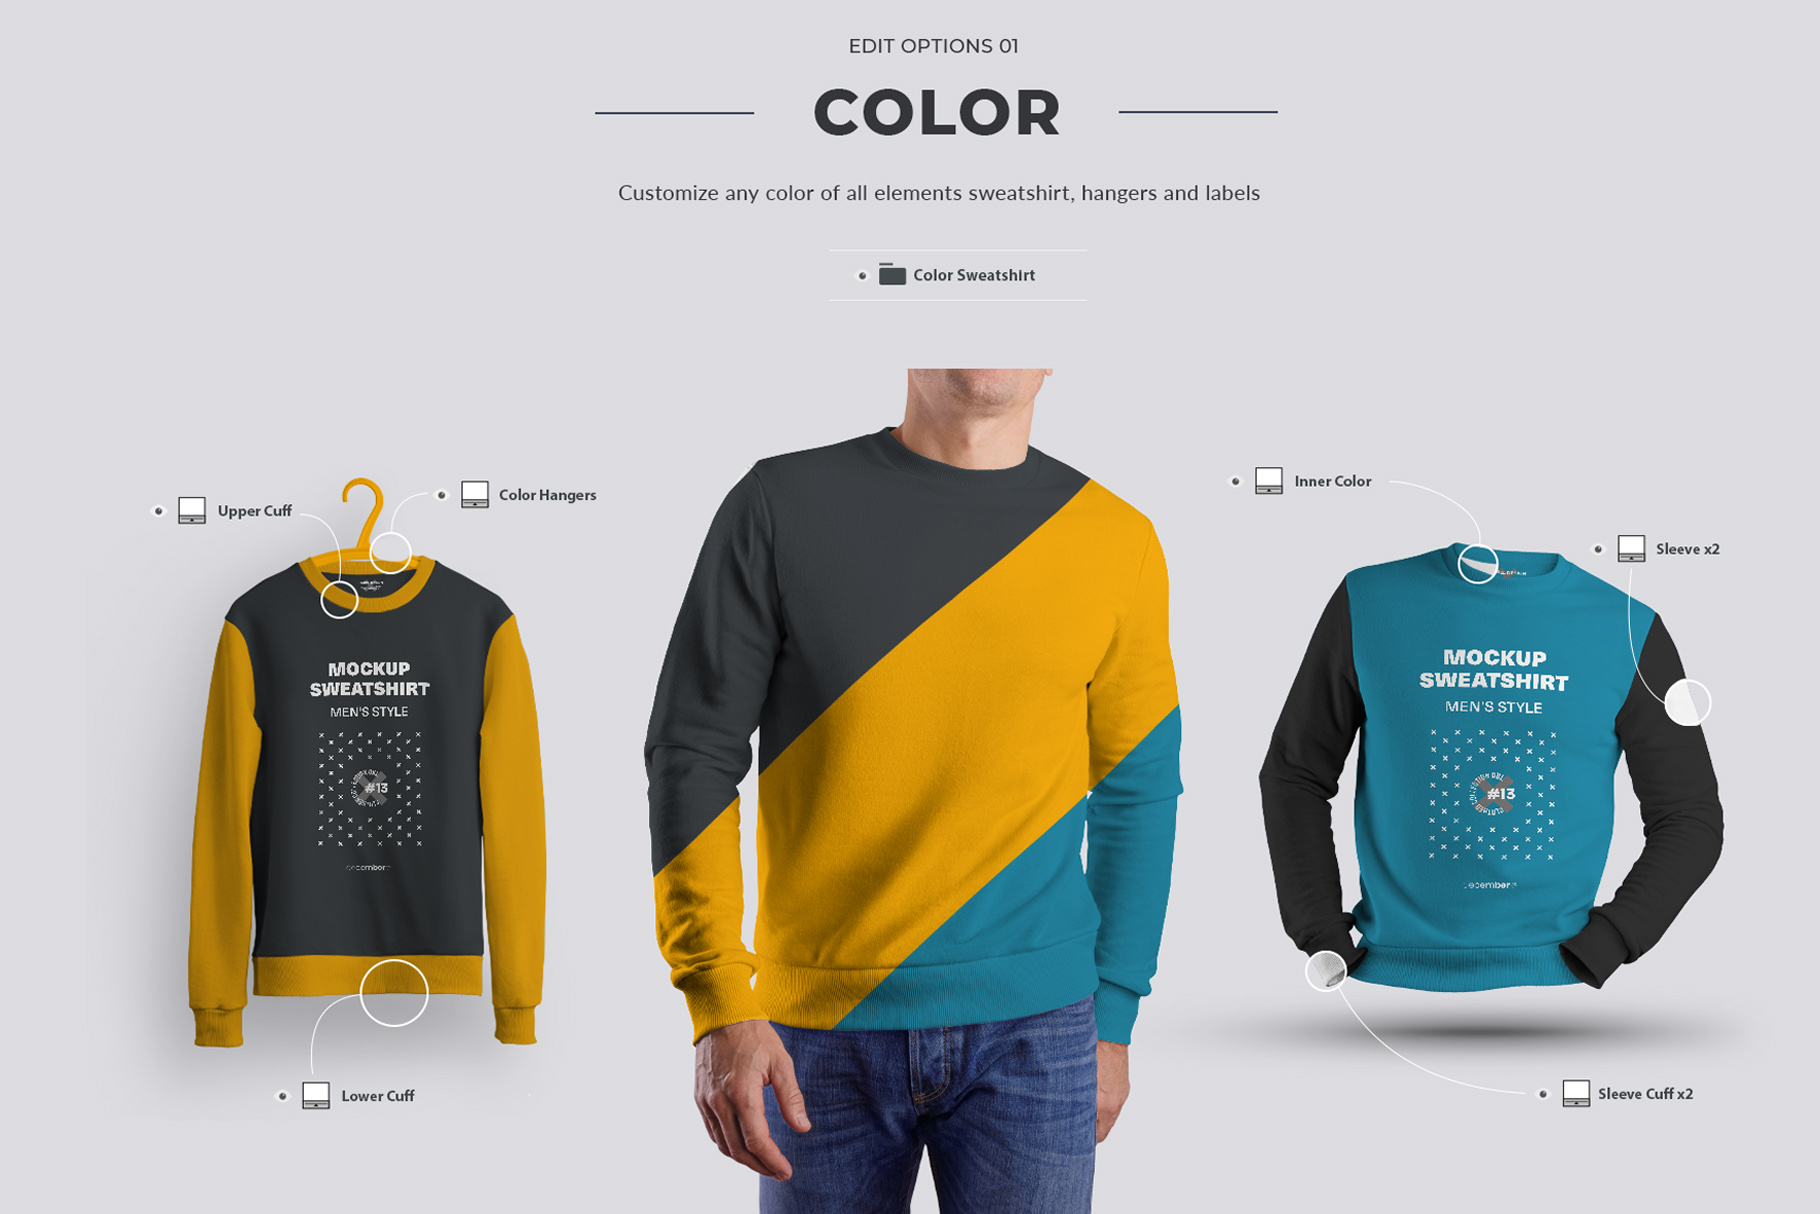 24 Mockup Men Sweatshirt On The Man 3D Style And Isolated Objects Color Example.